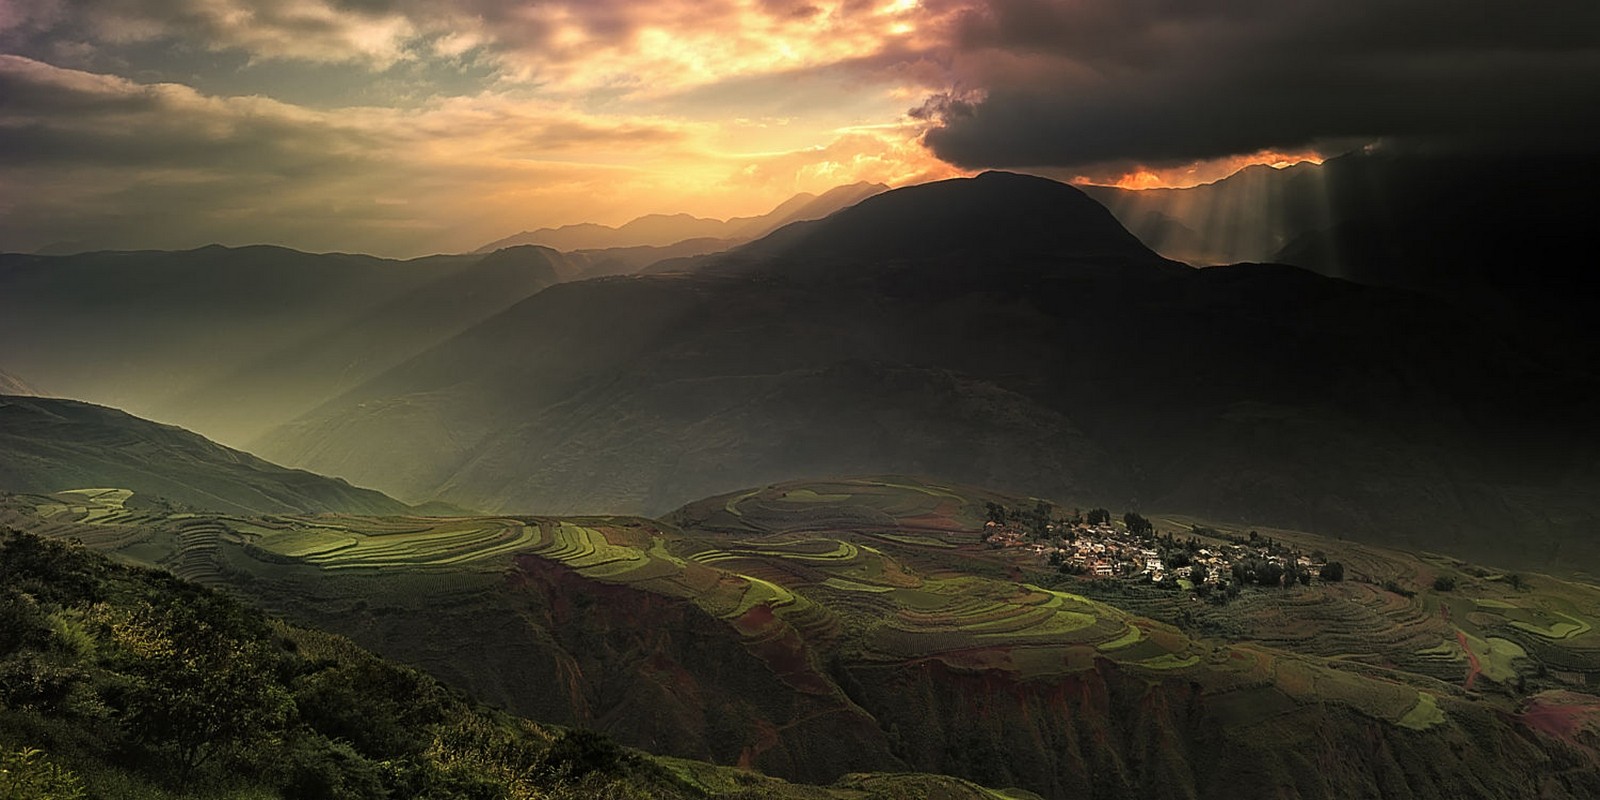 General 1600x800 landscape nature village mountains terraces rice sun rays clouds sky sunlight field China Asia